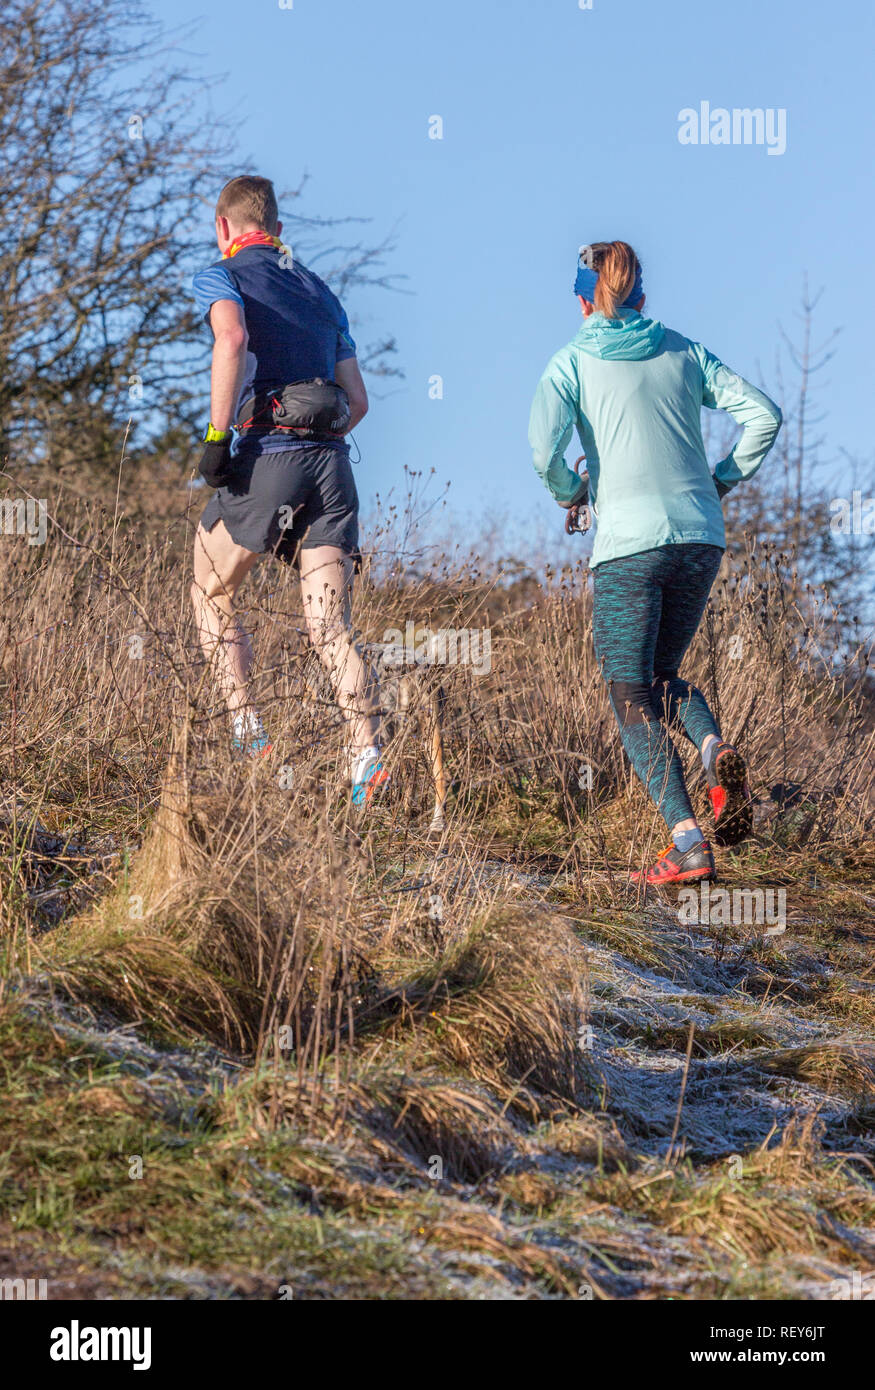 Fell Runners on the Cumbrian Fells in the English Lake District during Winter Stock Photo